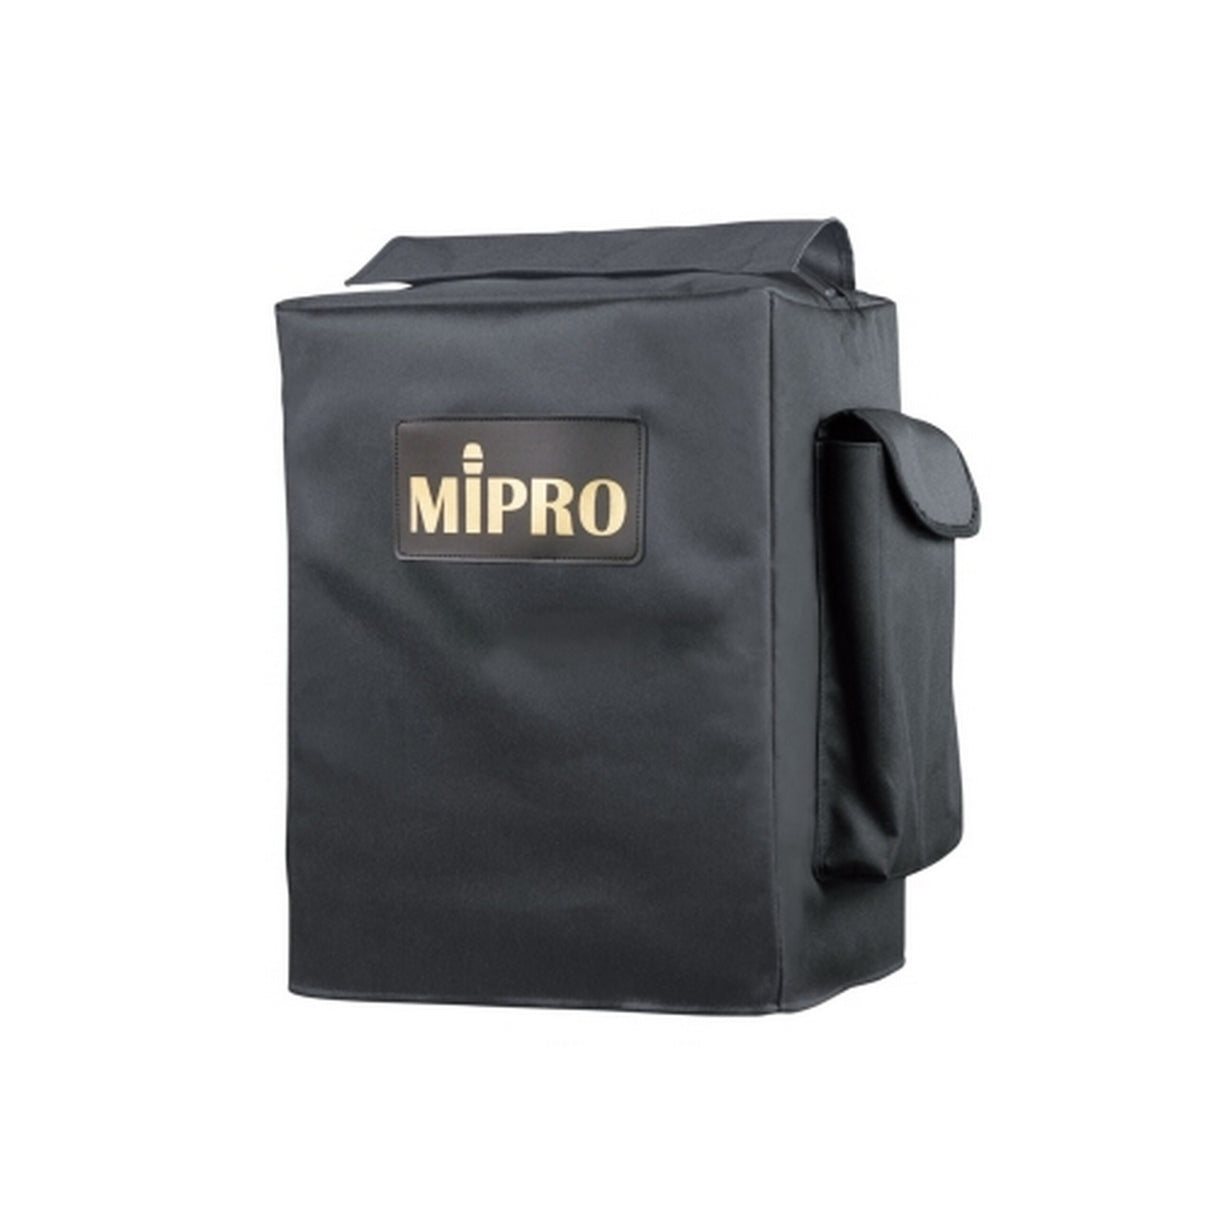 MIPRO SC-70 Storage Cover Bag for MA-707 Wireless PA System